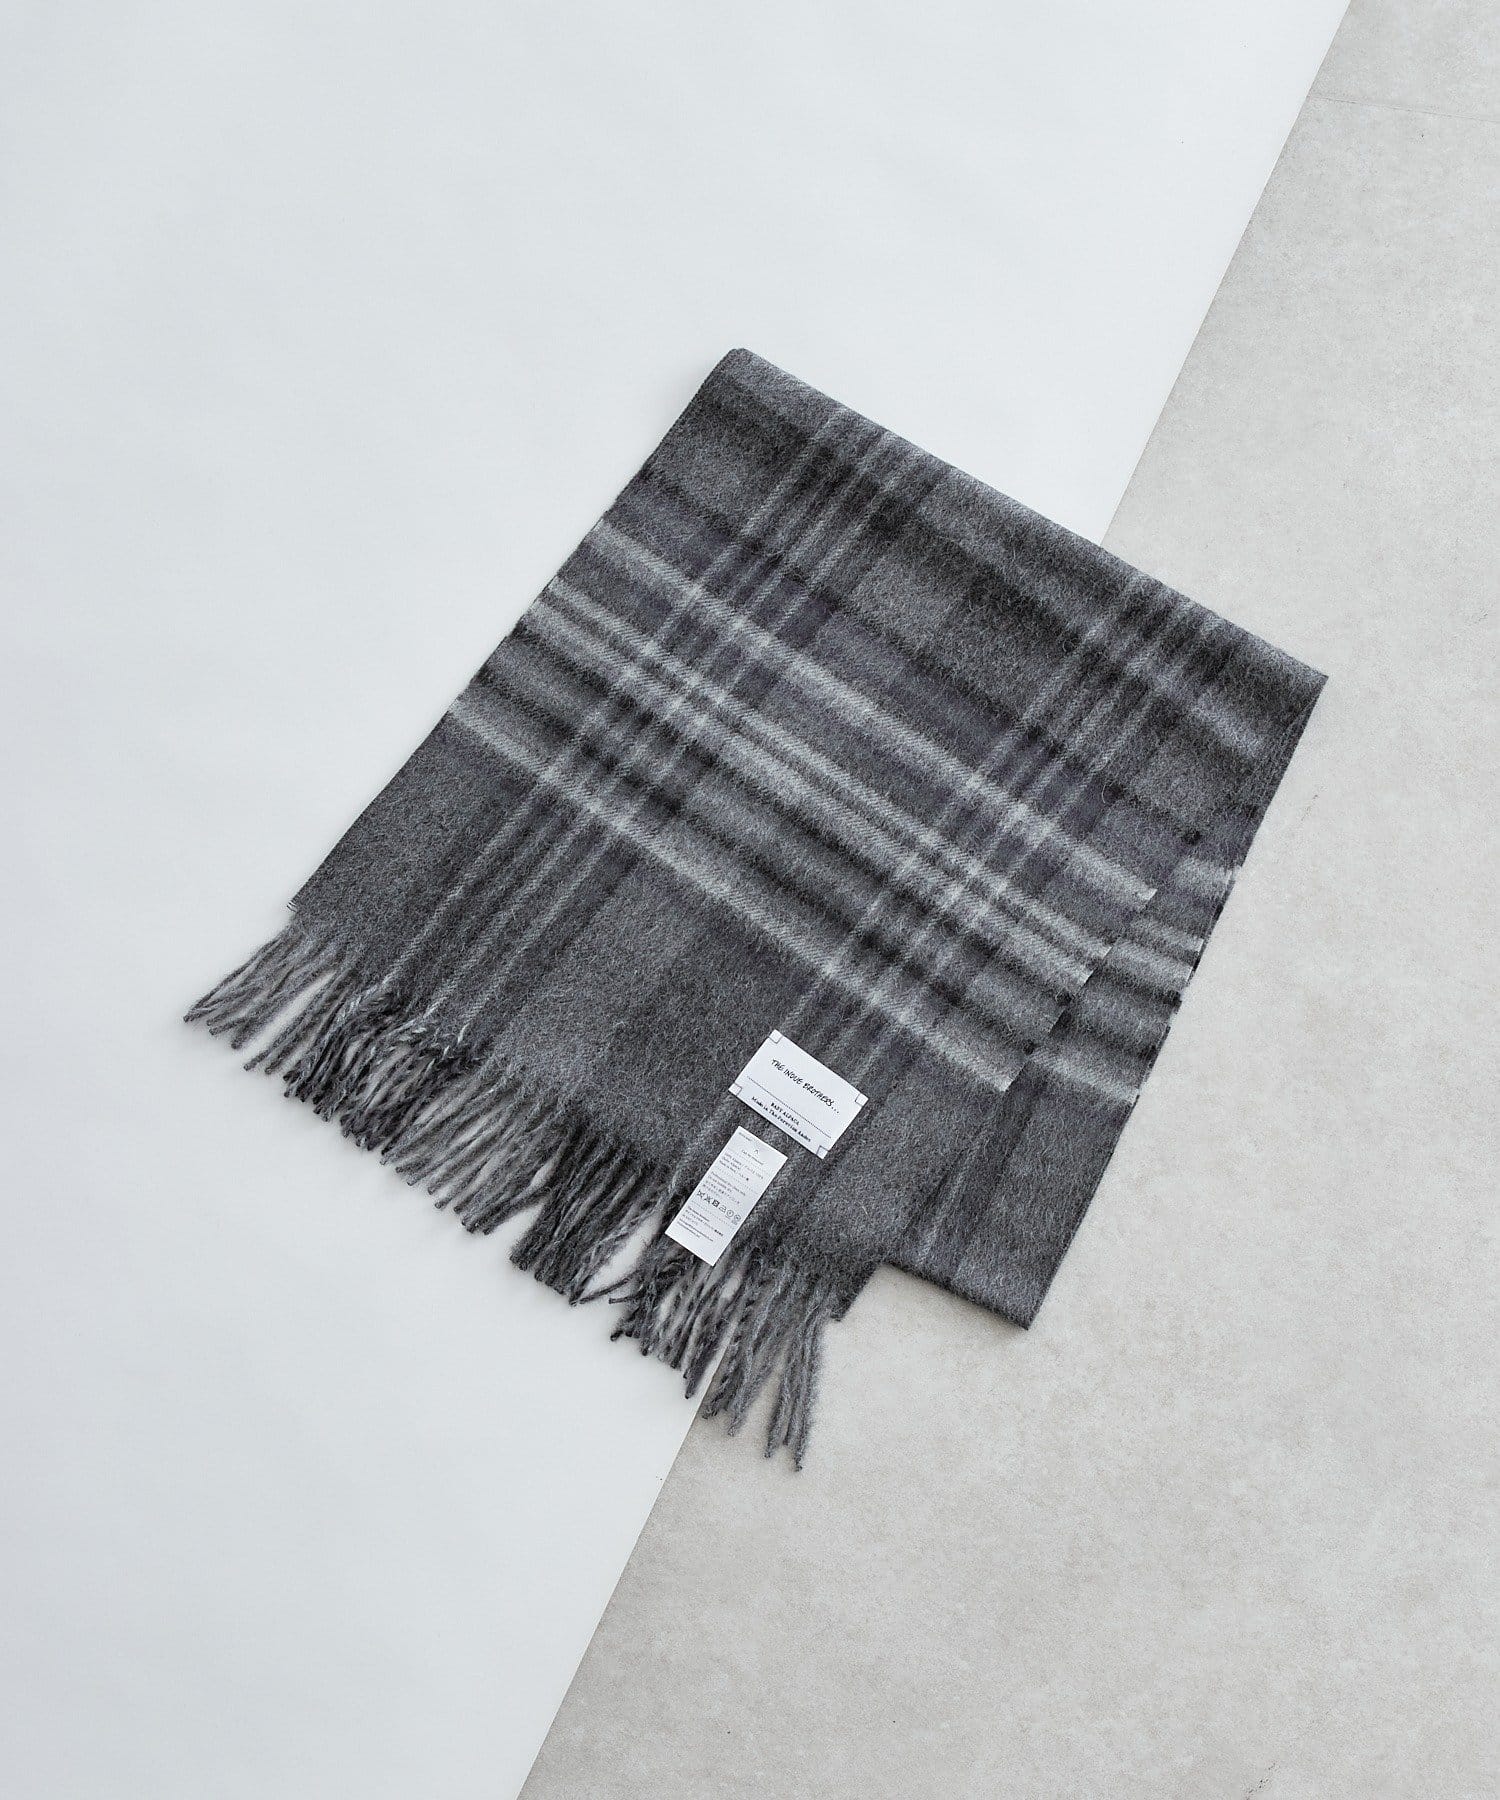 Lui's(ルイス) 【THE INOUE BROTHERS】Brushed Scarf Check